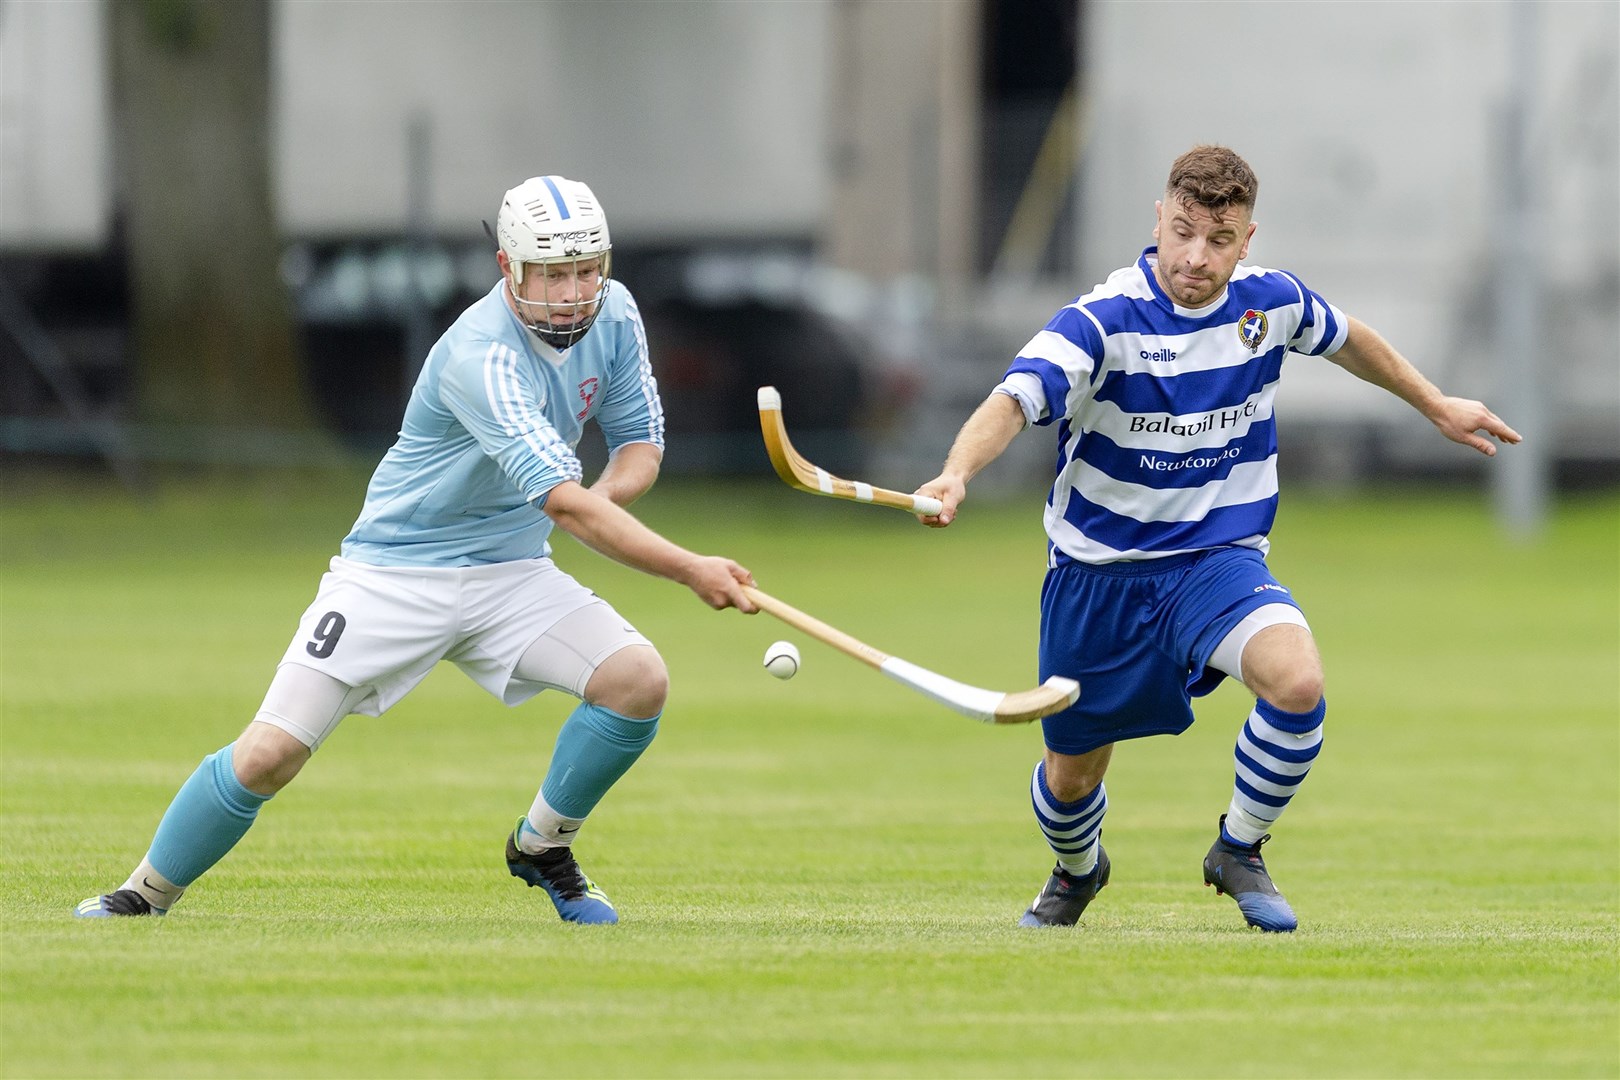 Liam Symonds (Caberfeidh) with Drew Macdonald (Newtonmore). Newtonmore v Caberfeidh in the Tulloch Homes Camanachd Cup semi final, played at The Bught, Inverness.